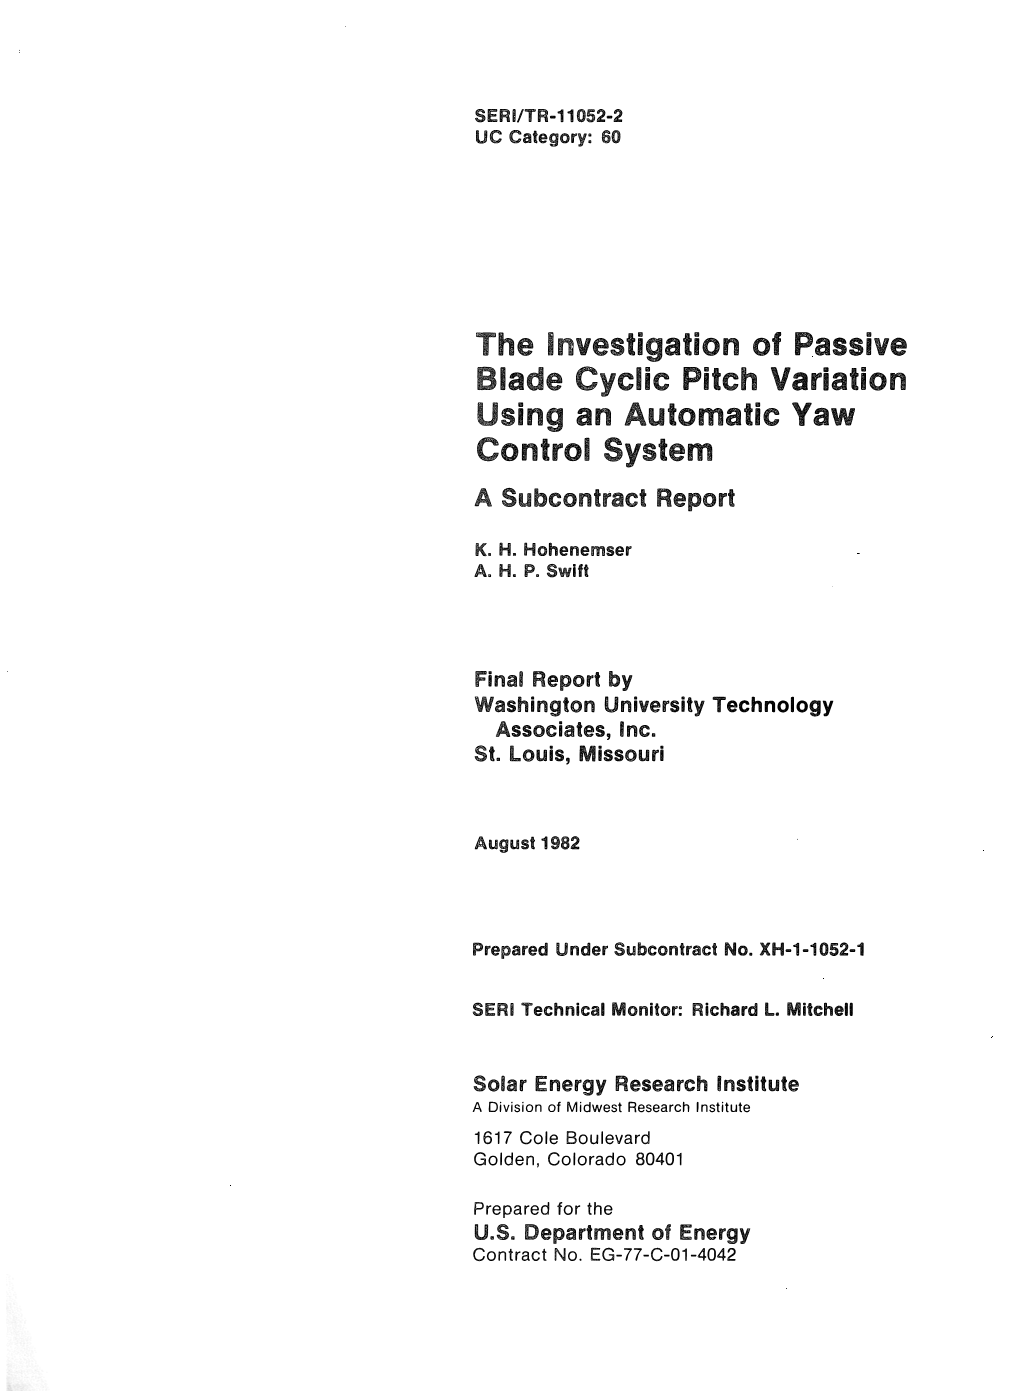 The Investigation of Passive Blade Cyclic Pitch Variation Using an Automatic Yaw Control System: a Subcontract Report